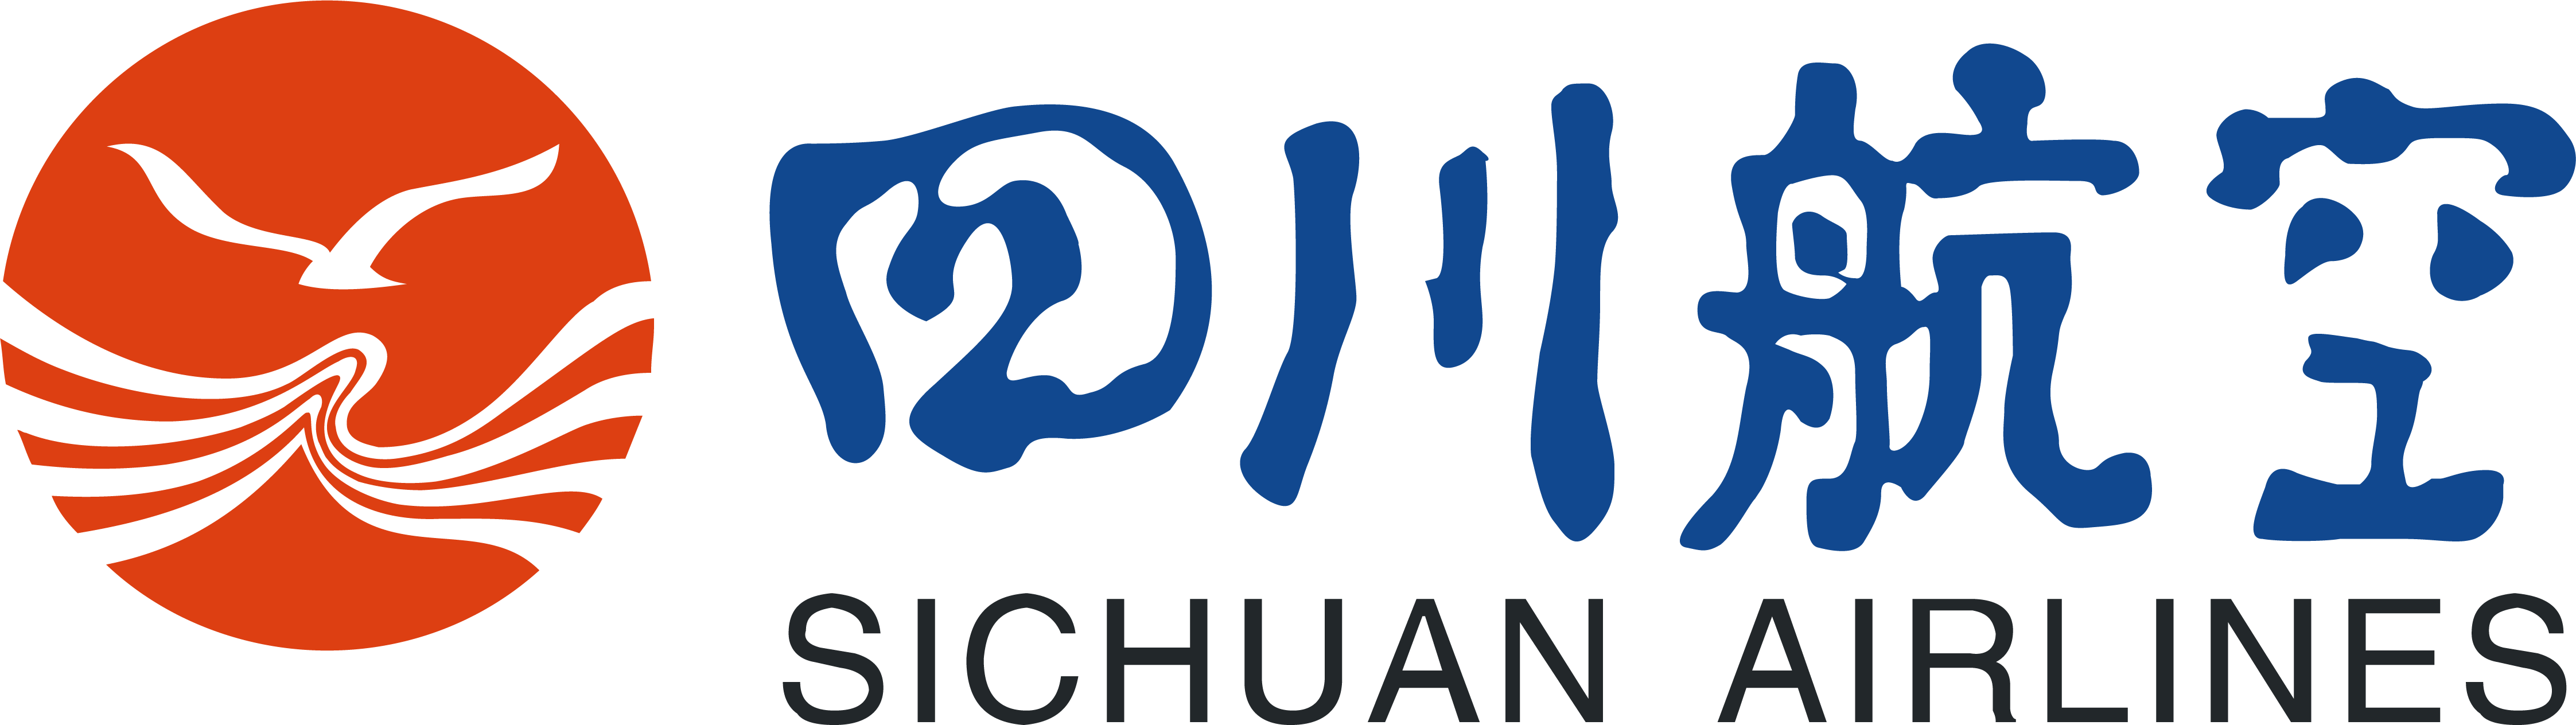 Sichuan Airlines Corporation